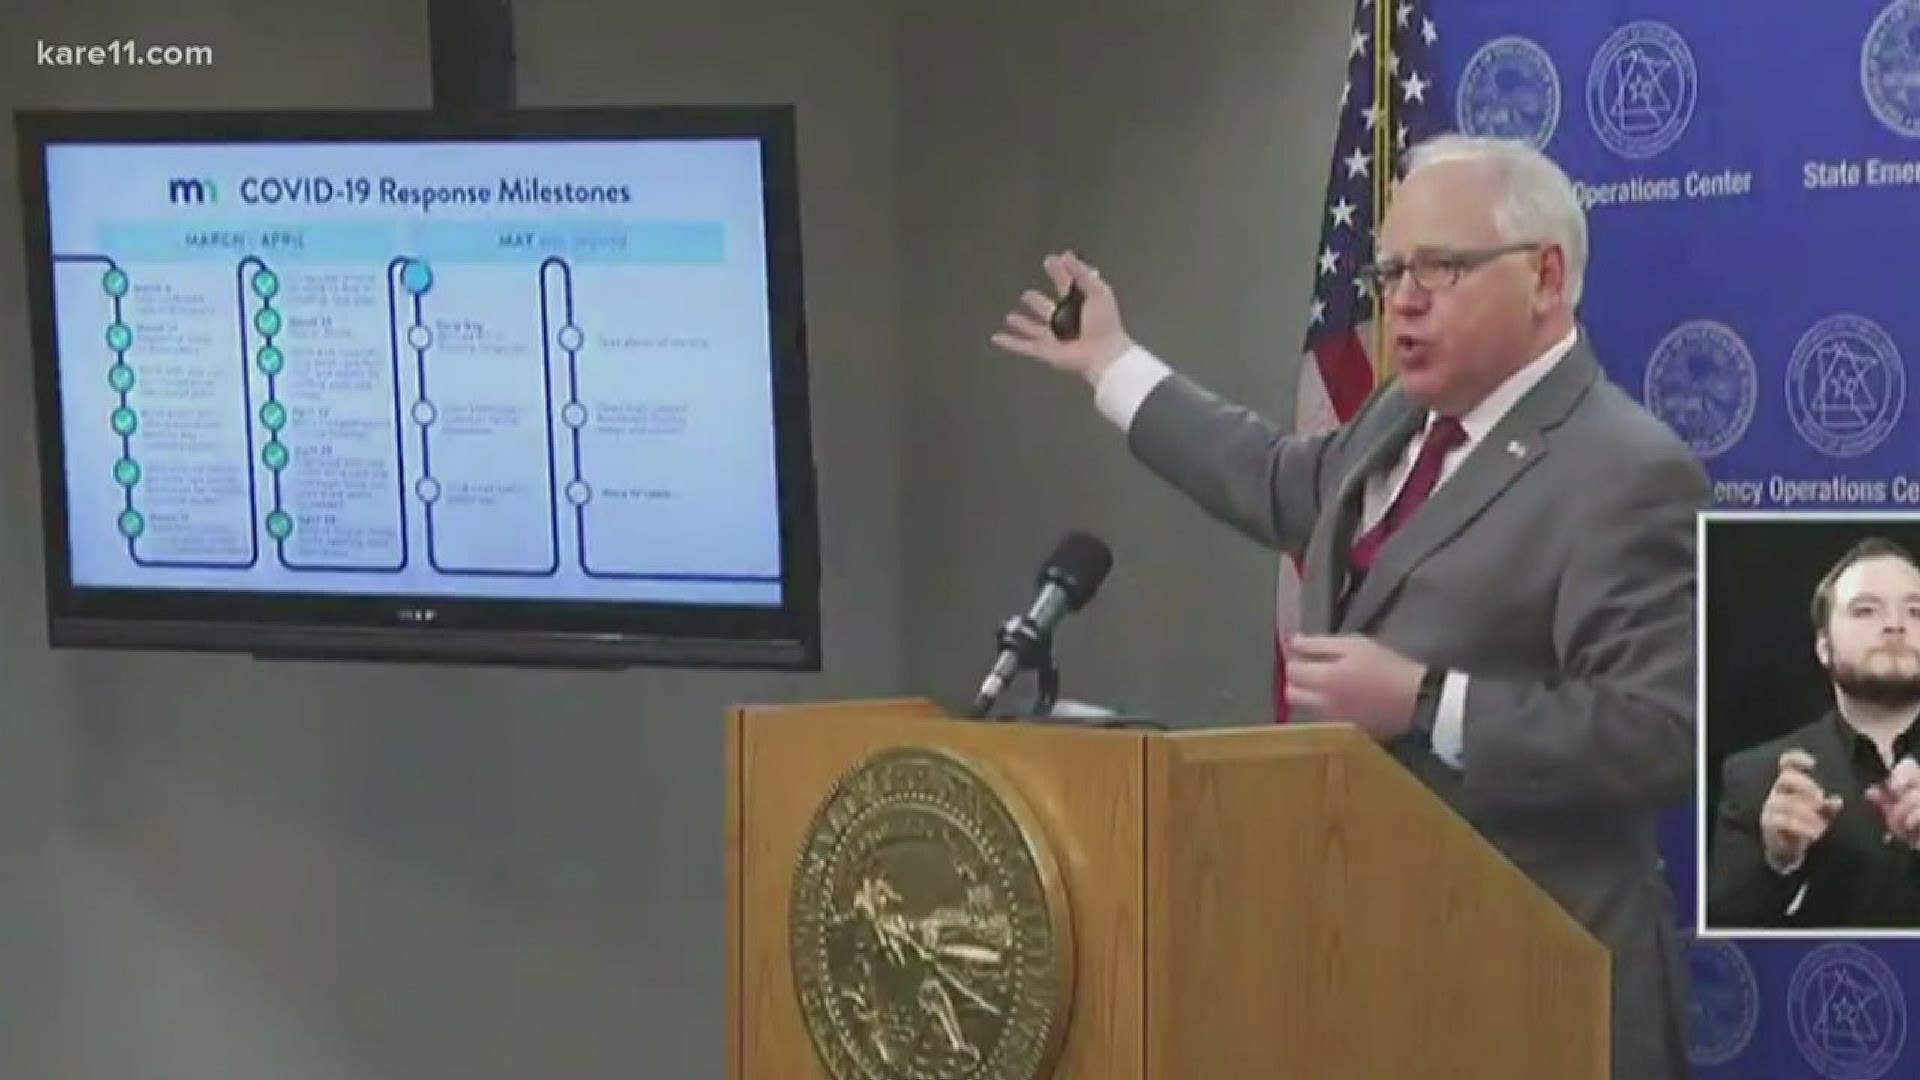 While Governor Walz extended the stay-at-home order until May 18, starting Monday certain businesses that have been closed can begin reopening.